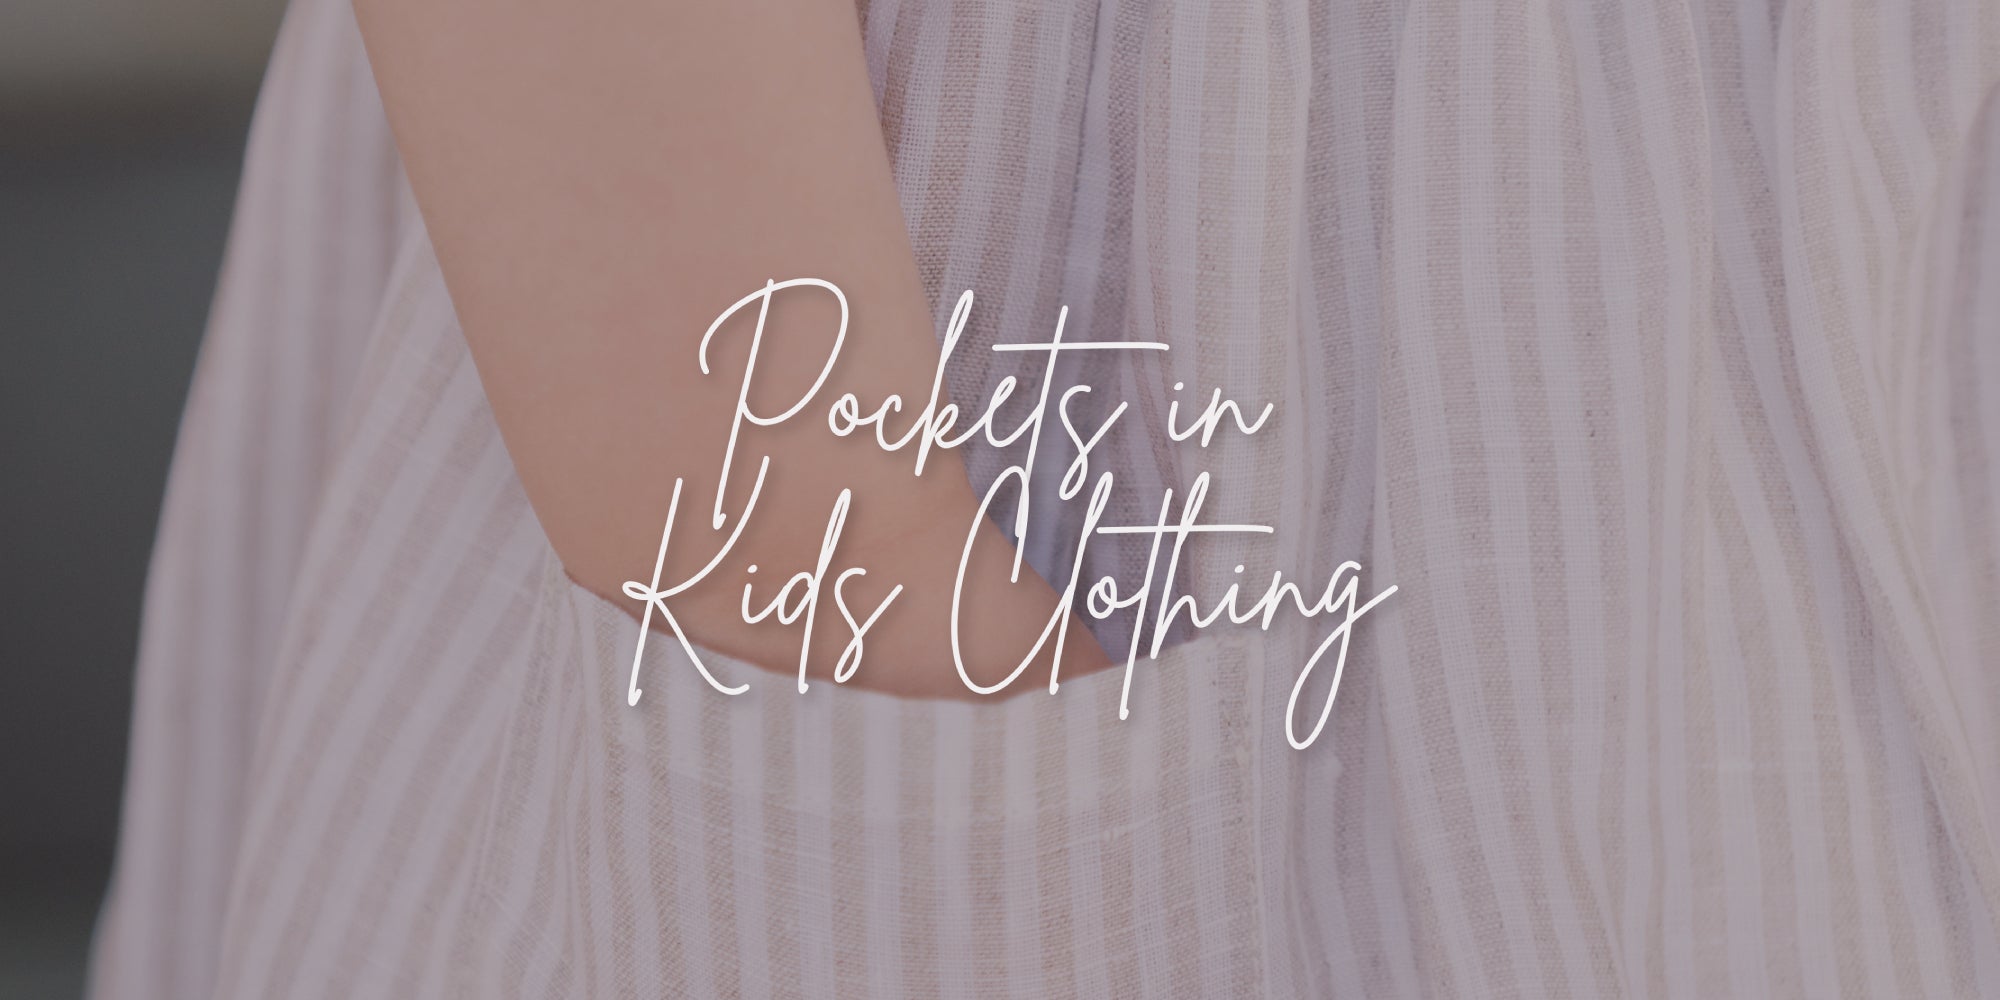 Pockets in kids clothing